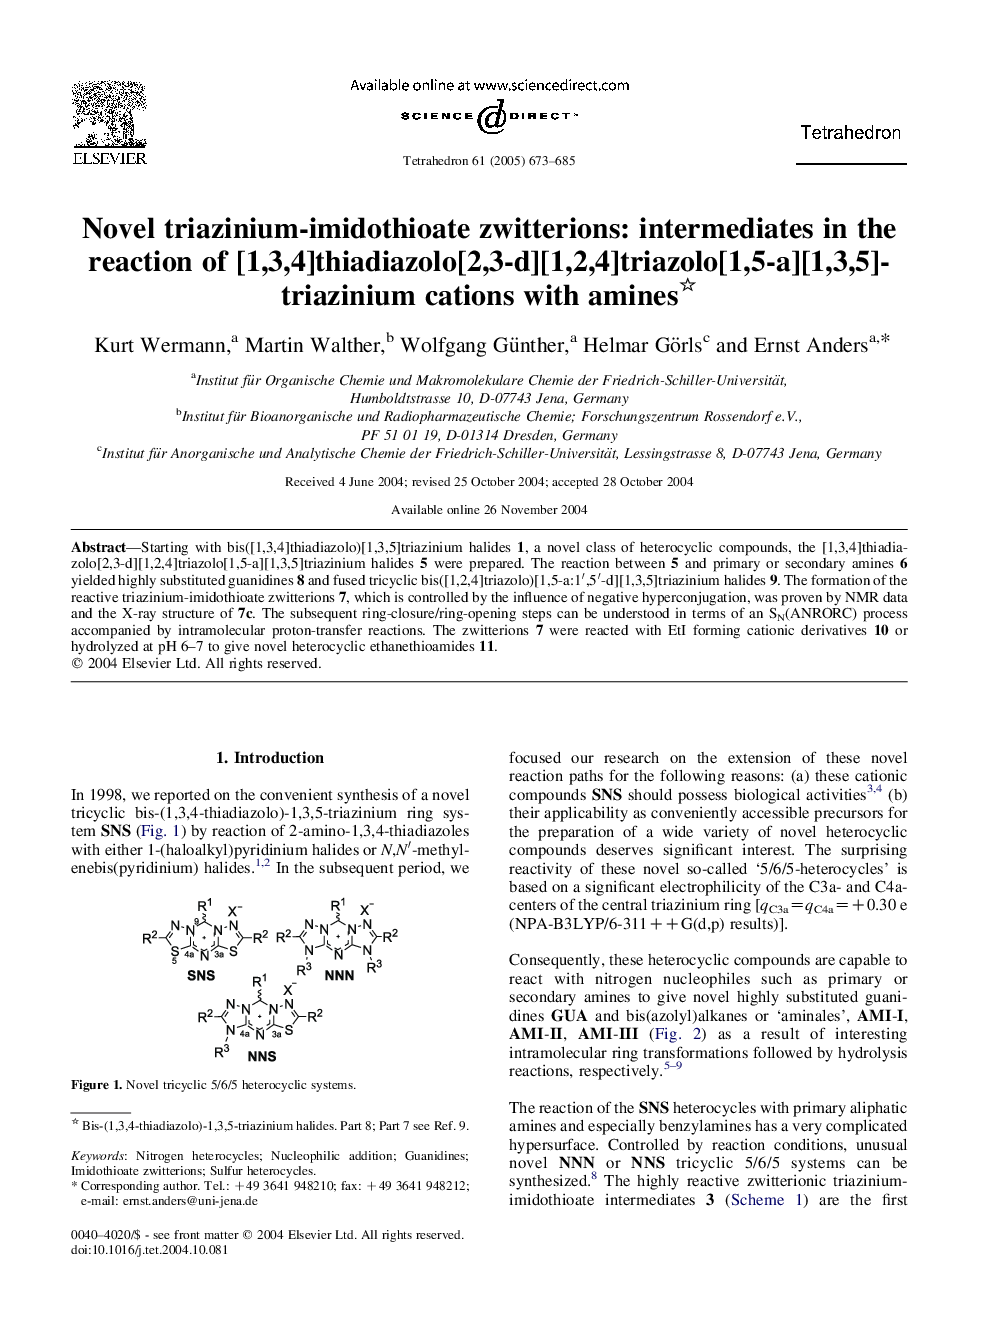 Novel triazinium-imidothioate zwitterions: intermediates in the reaction of [1,3,4]thiadiazolo[2,3-d][1,2,4]triazolo[1,5-a][1,3,5]triazinium cations with amines